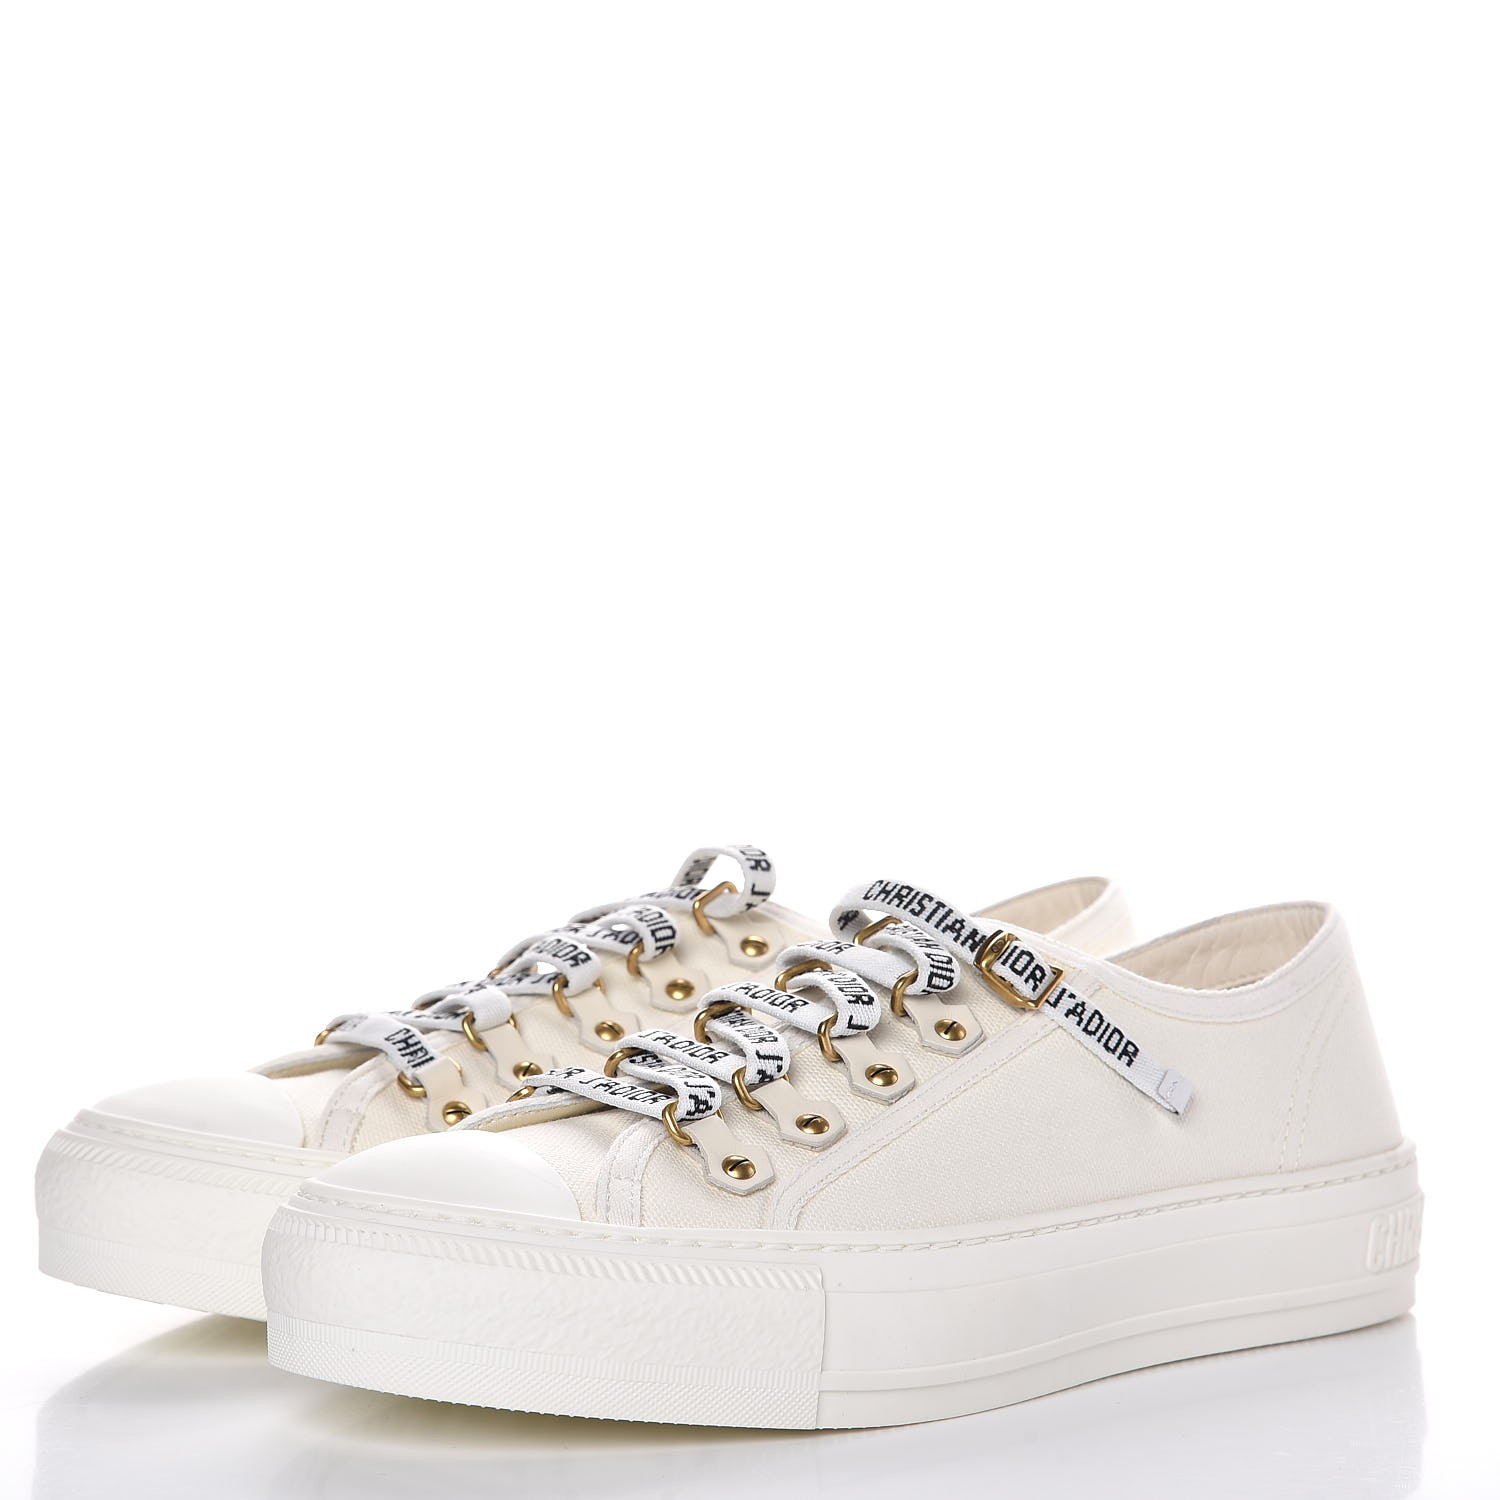 CHRISTIAN DIOR Canvas Walk'n Dior Low Top Sneakers 37.5 White 295900